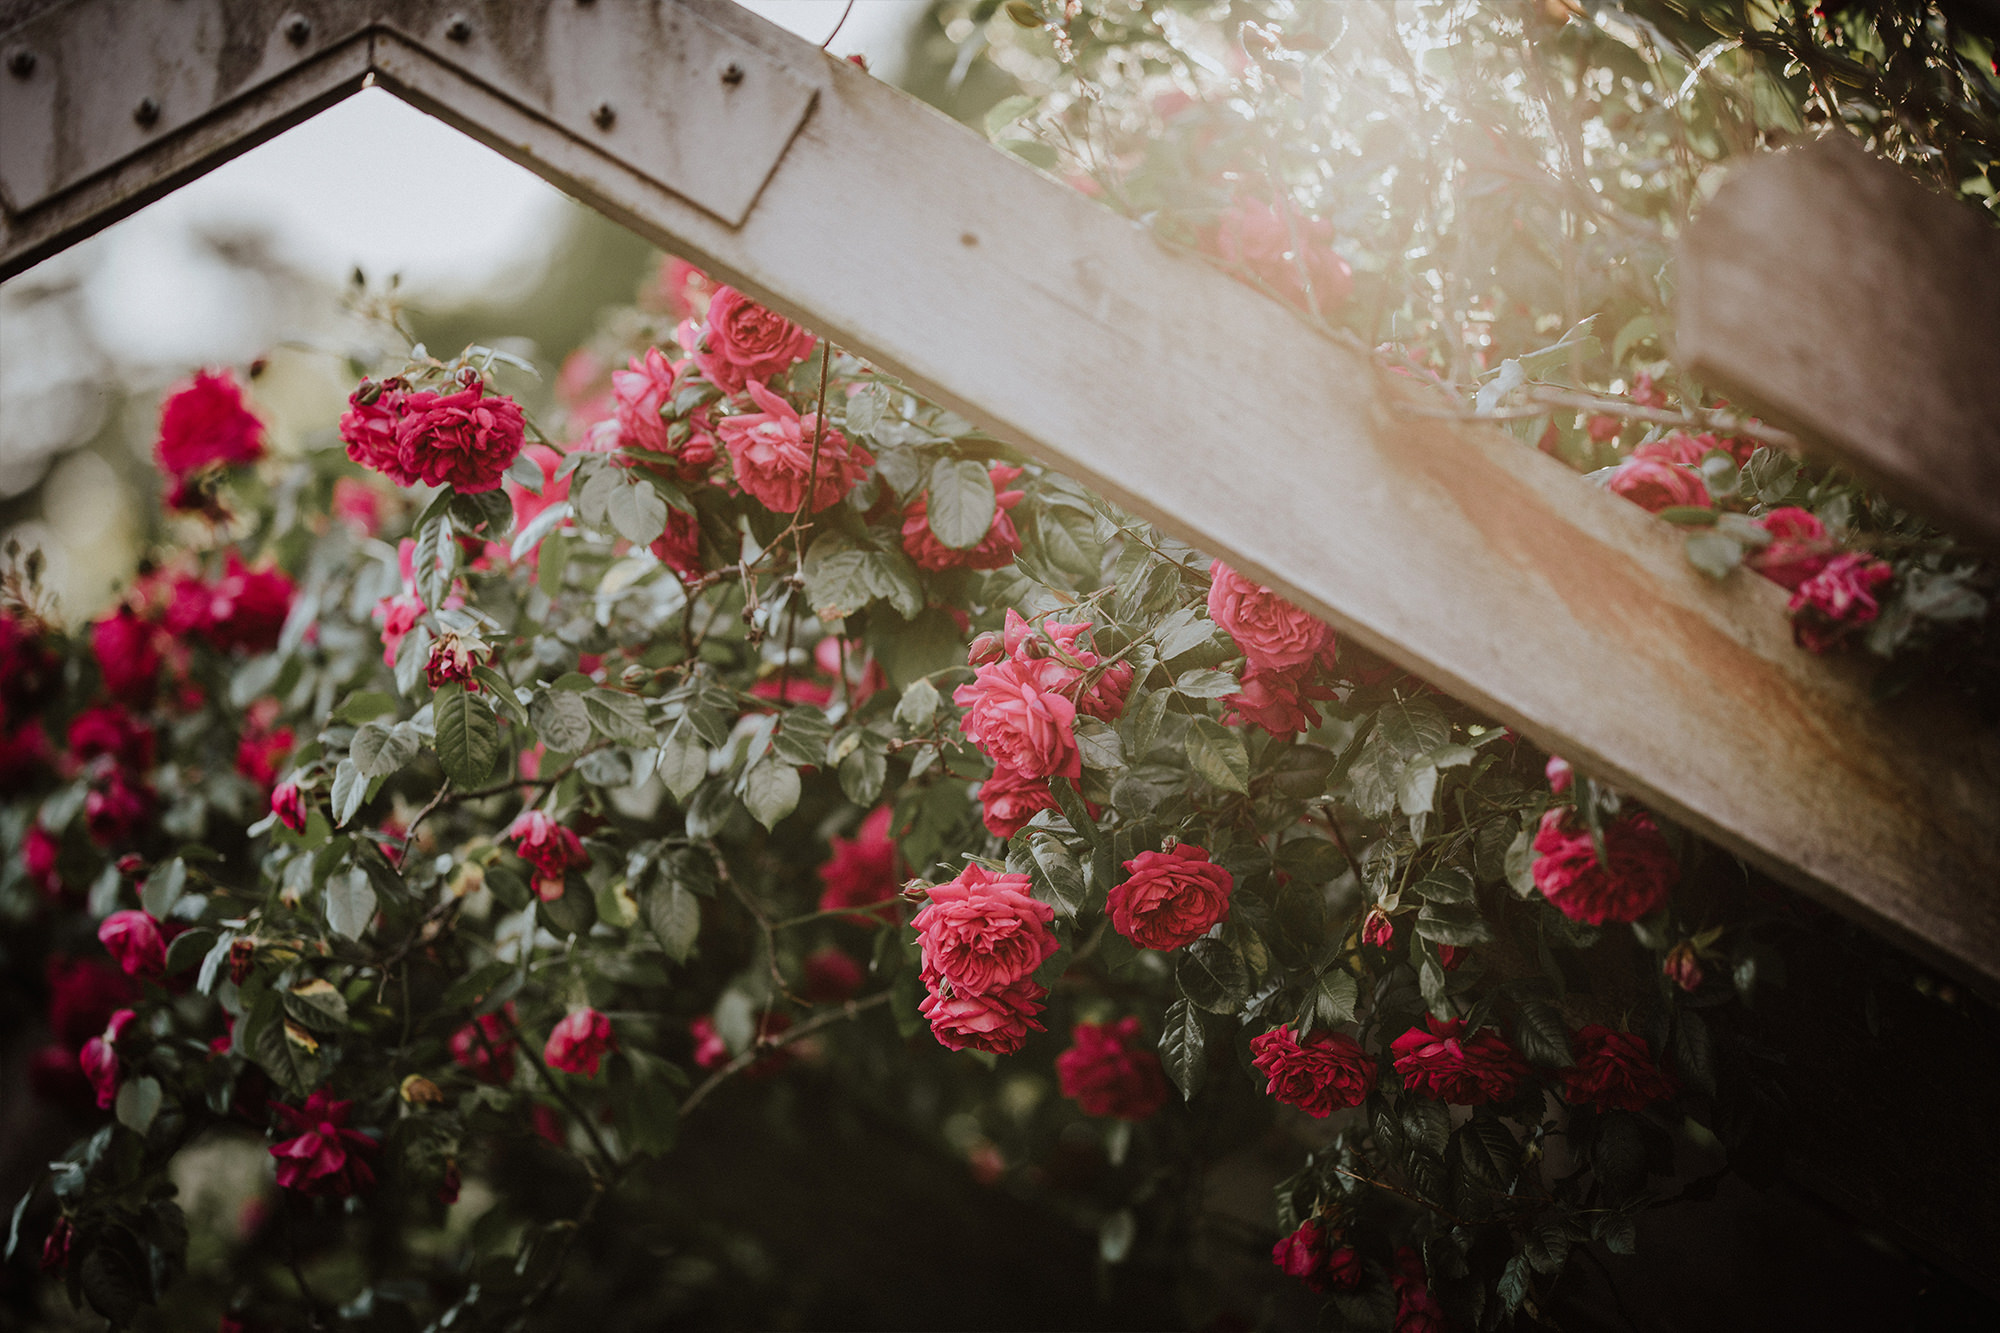 Roses hanging over a wooden trellis